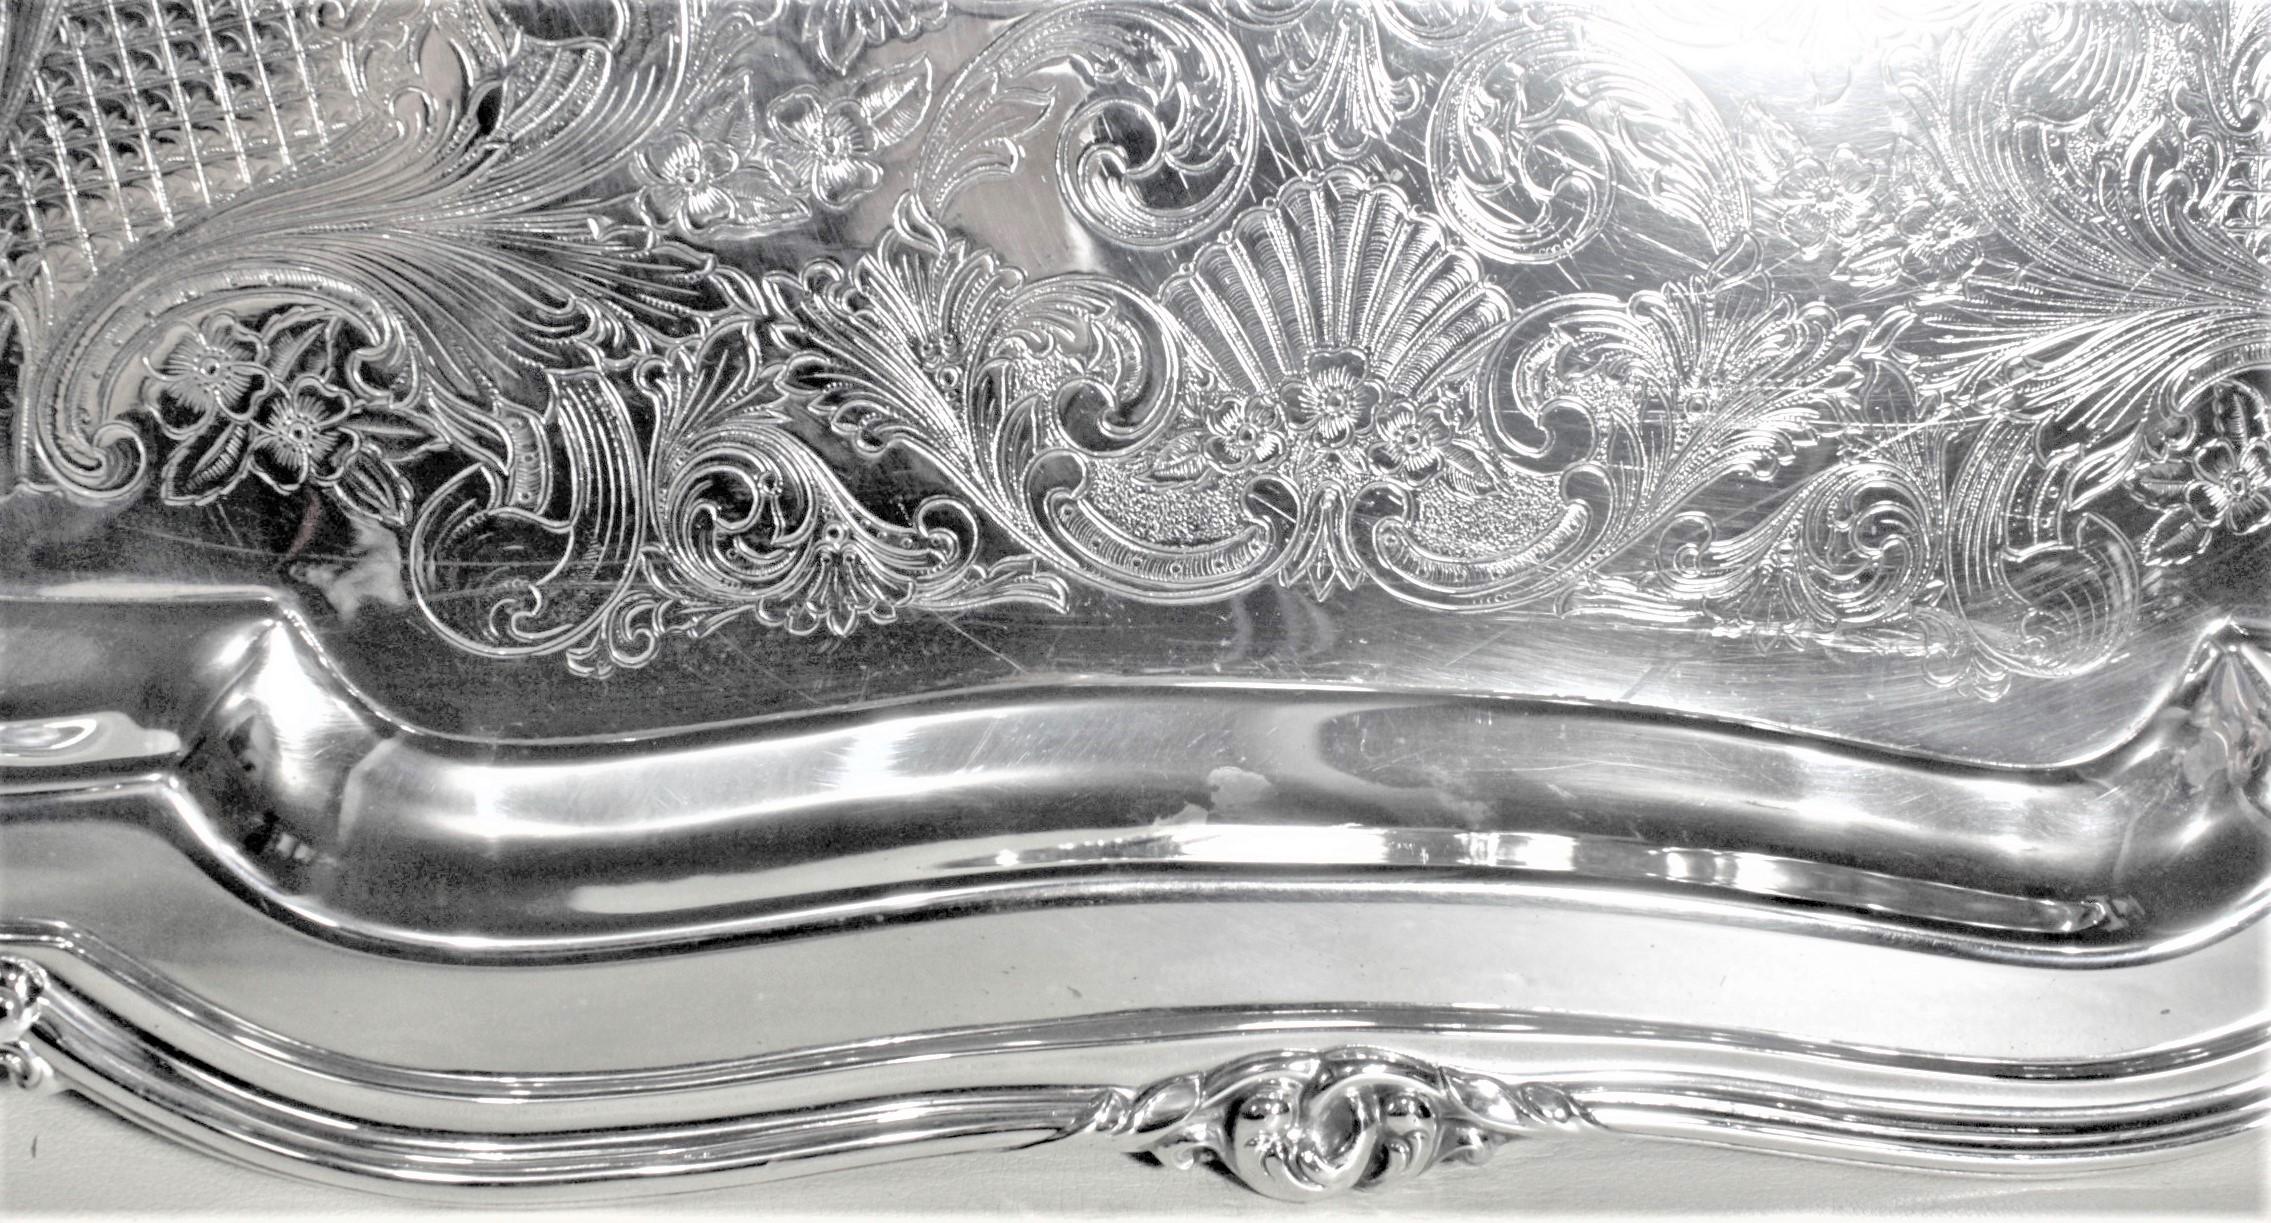 20th Century Large Antique Styled Silver Plated Serving Tray with Ornate Engraving & Handles